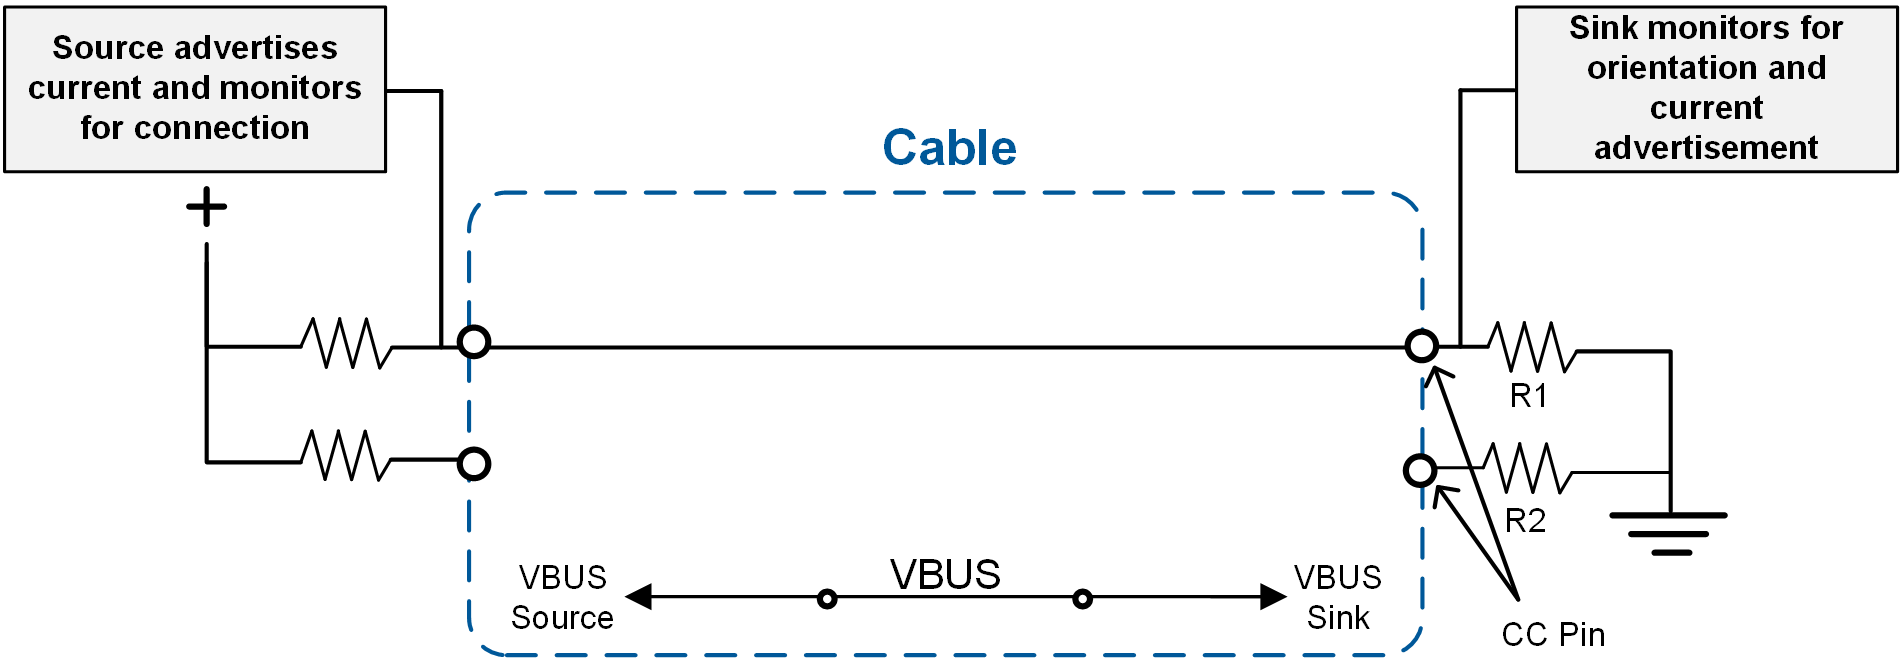 USB Type-C Charging Design, Optimization, and Interoperability Article | MPS